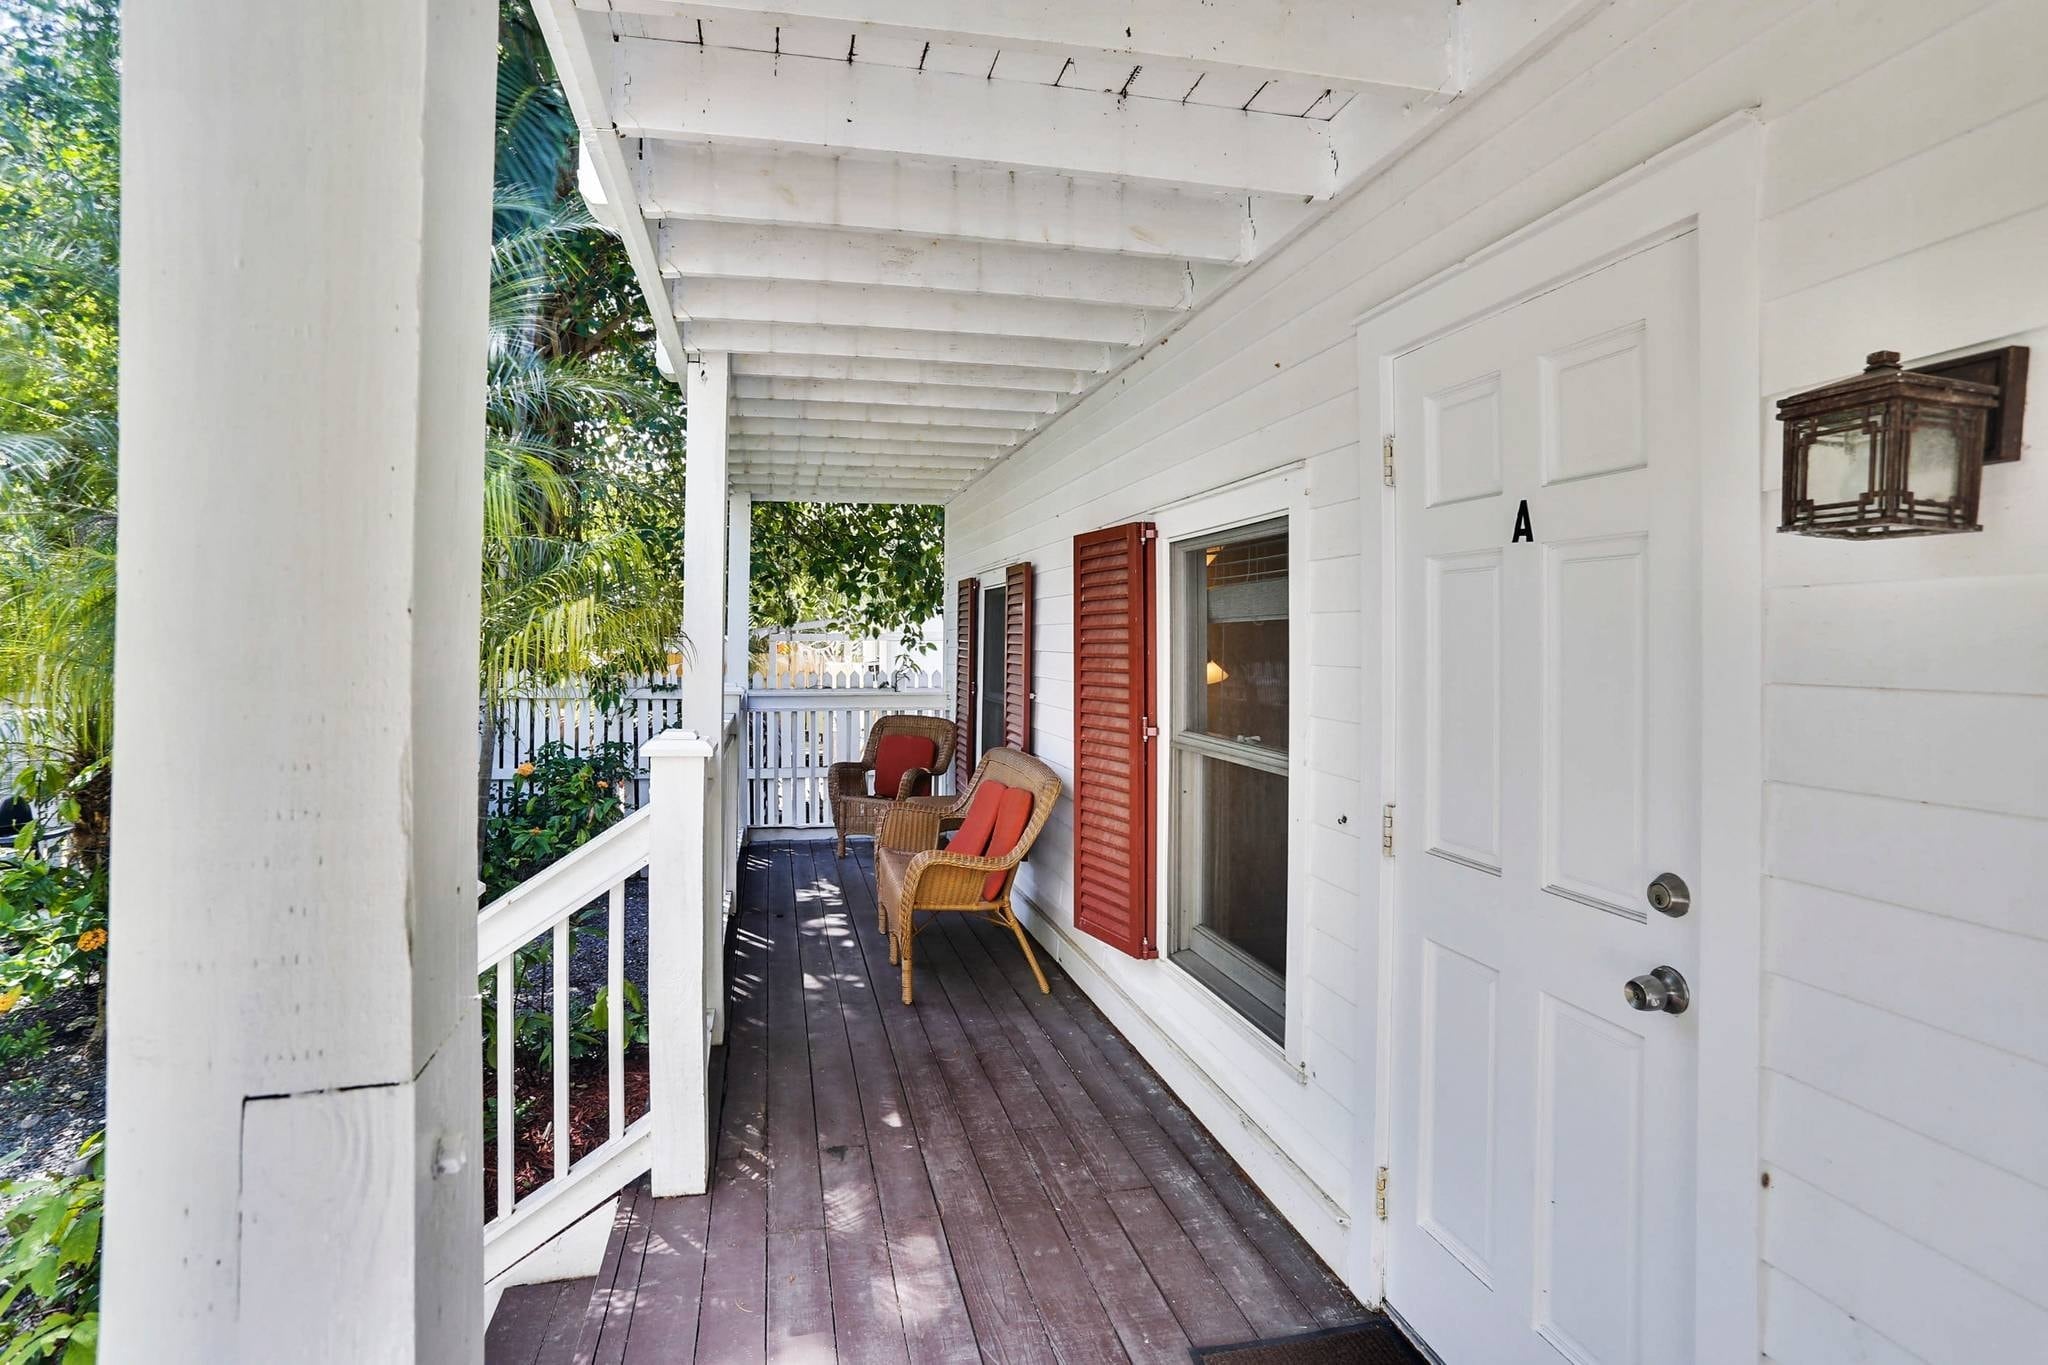 Enjoy morning coffee on the porch.